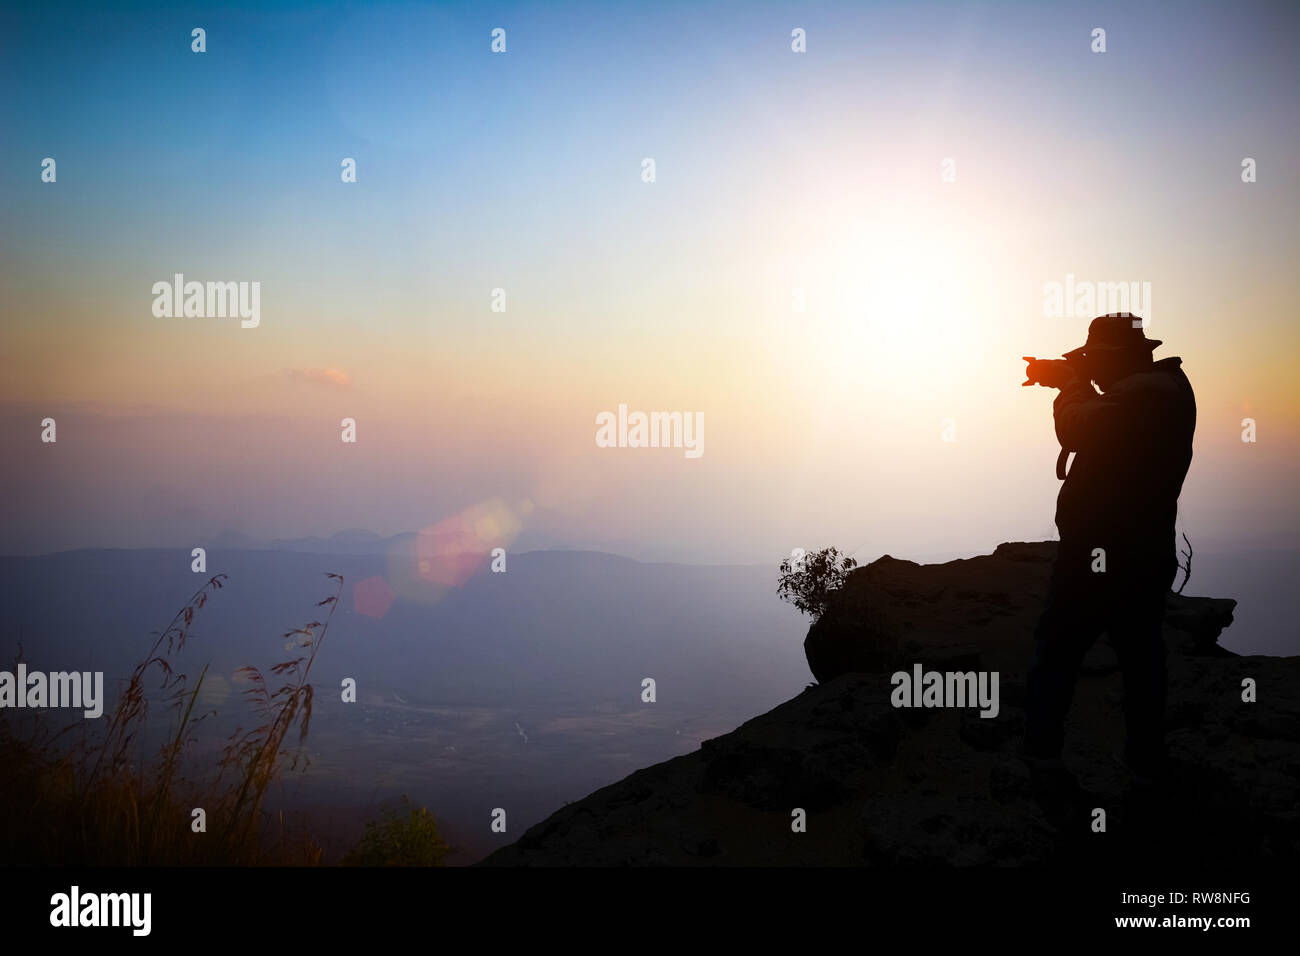 Vintage style of abstract blurred as orange light autumn. The young photographer on mountains and trees, looking at the scenery during golden sunrise  Stock Photo